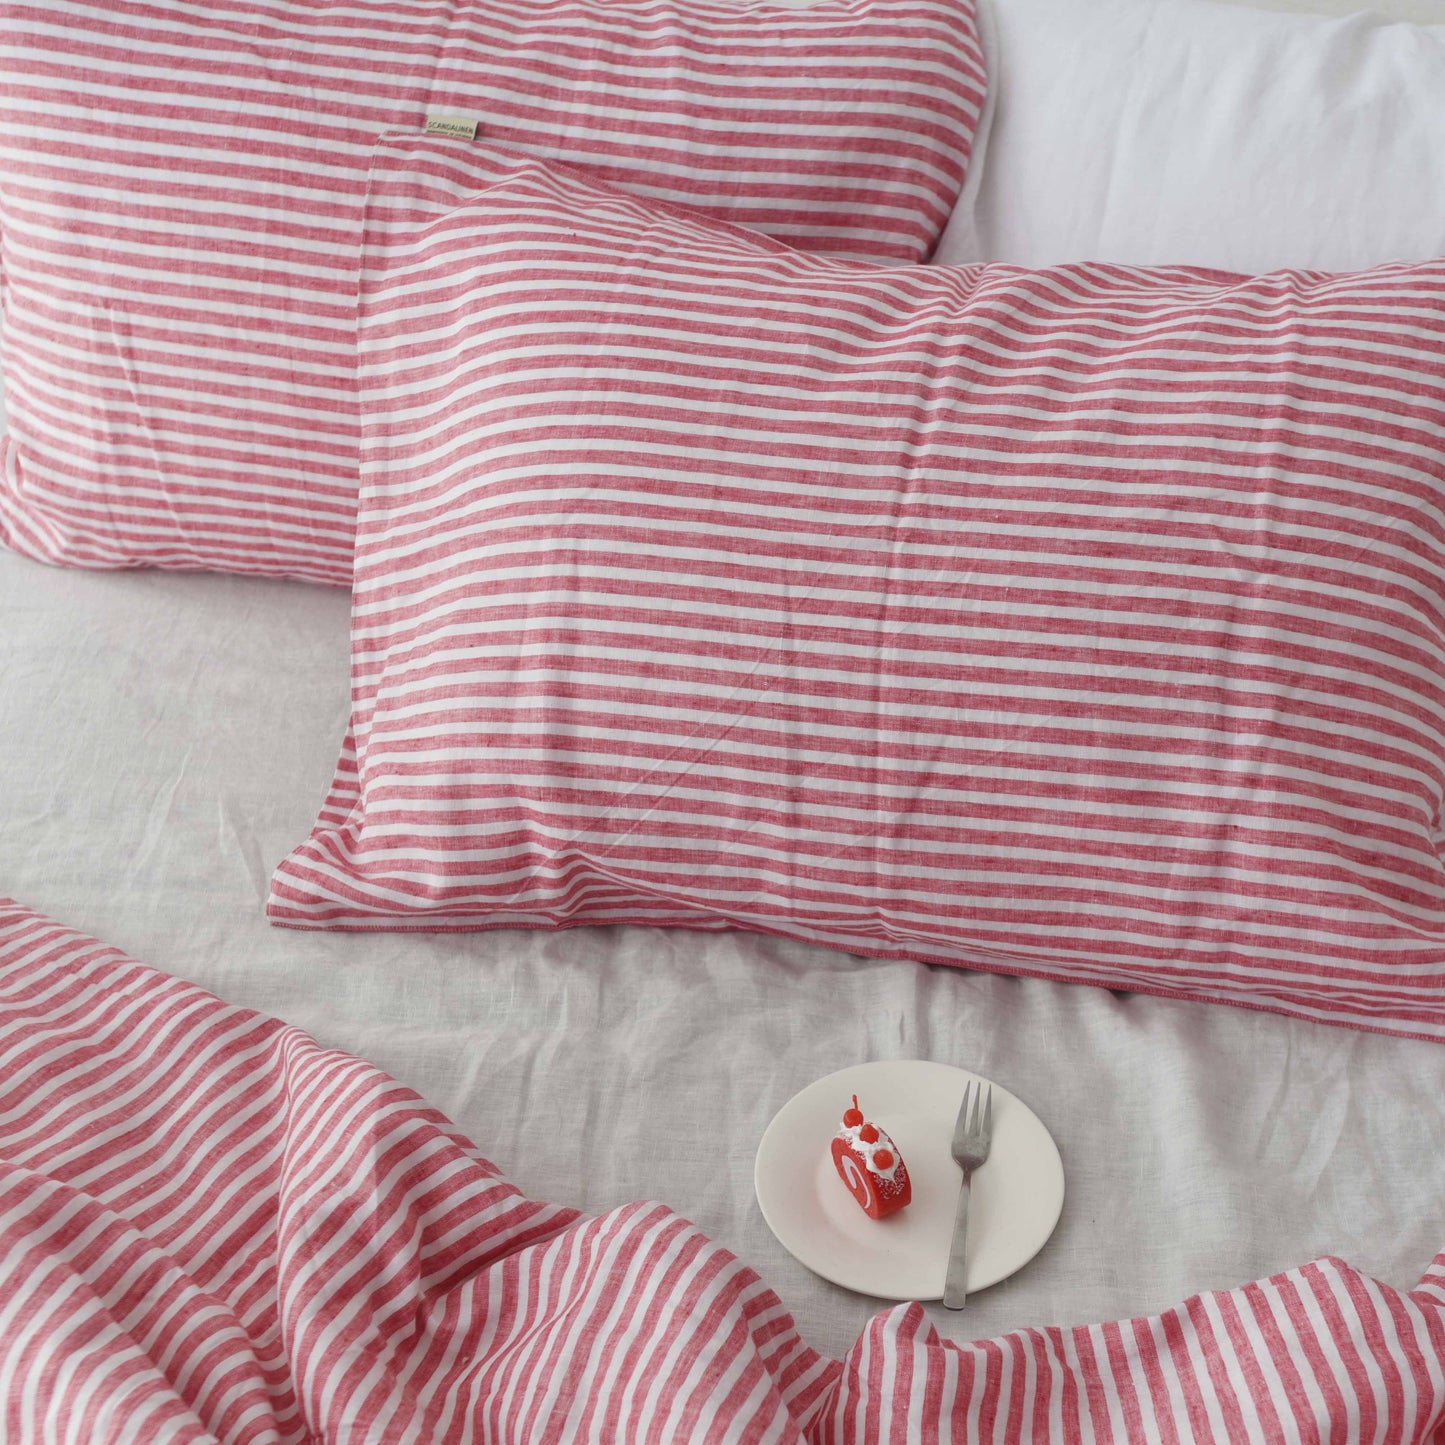 Red Striped French Linen Pillowcase - Yarn Dyeing 52